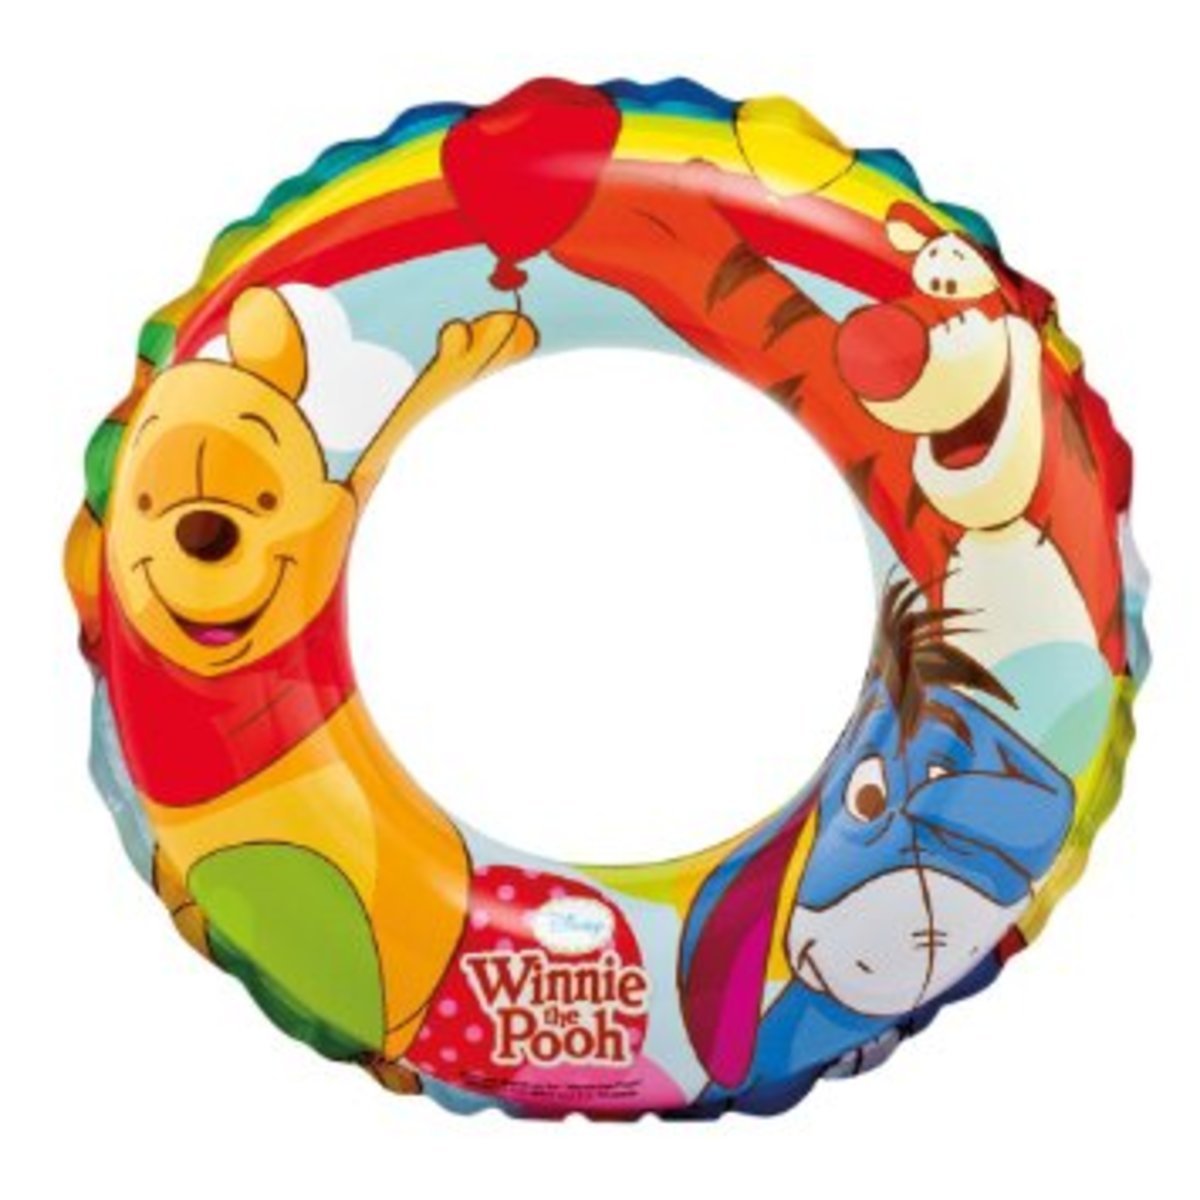 Winnie the Pooh Swimming Ring 20" (51cm) One piece, Individual Packing